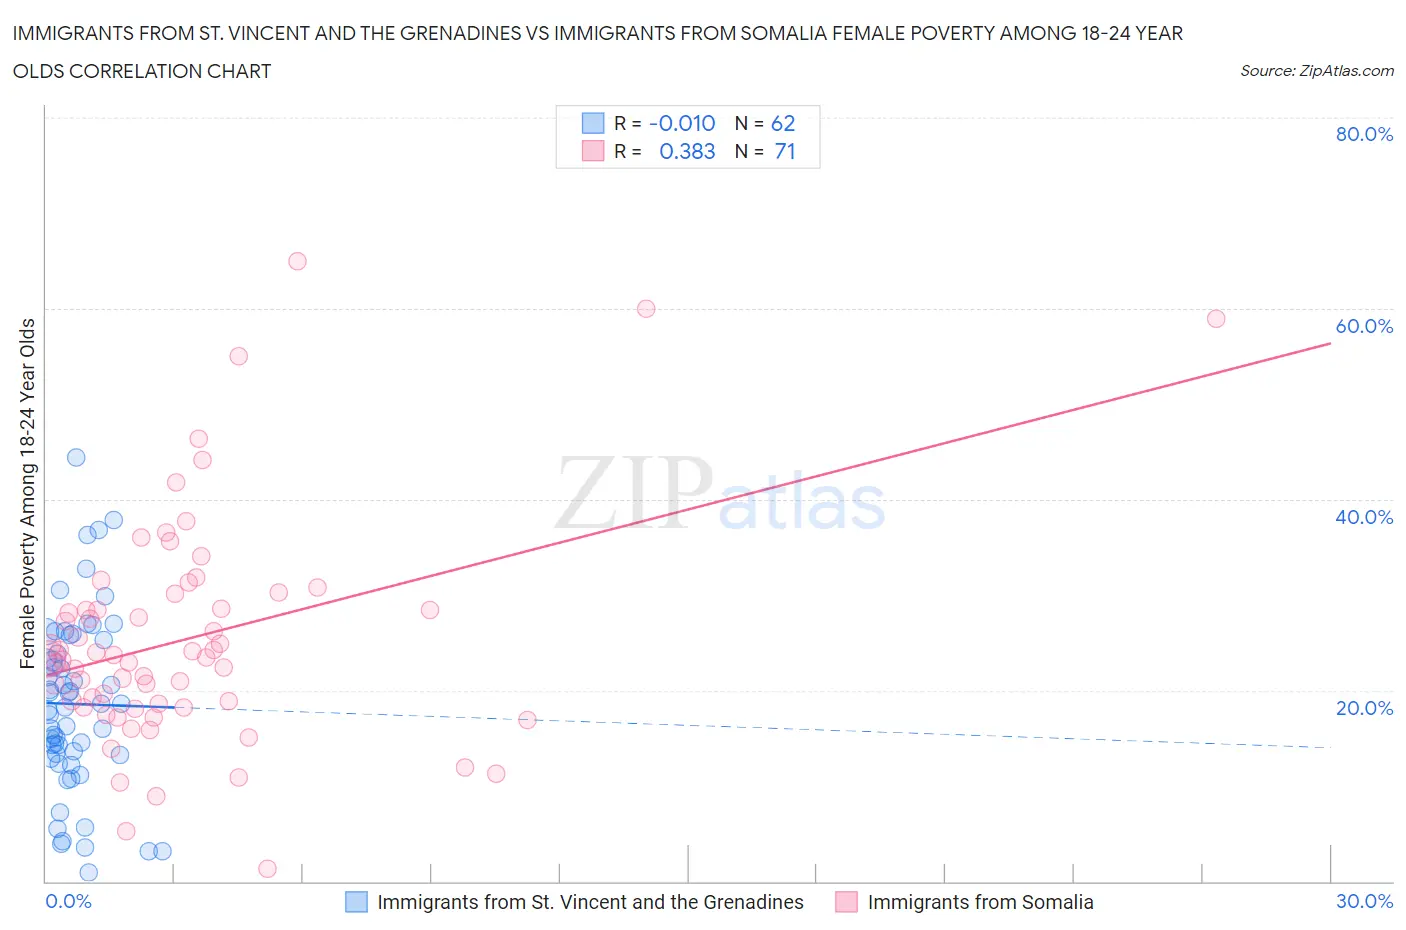 Immigrants from St. Vincent and the Grenadines vs Immigrants from Somalia Female Poverty Among 18-24 Year Olds